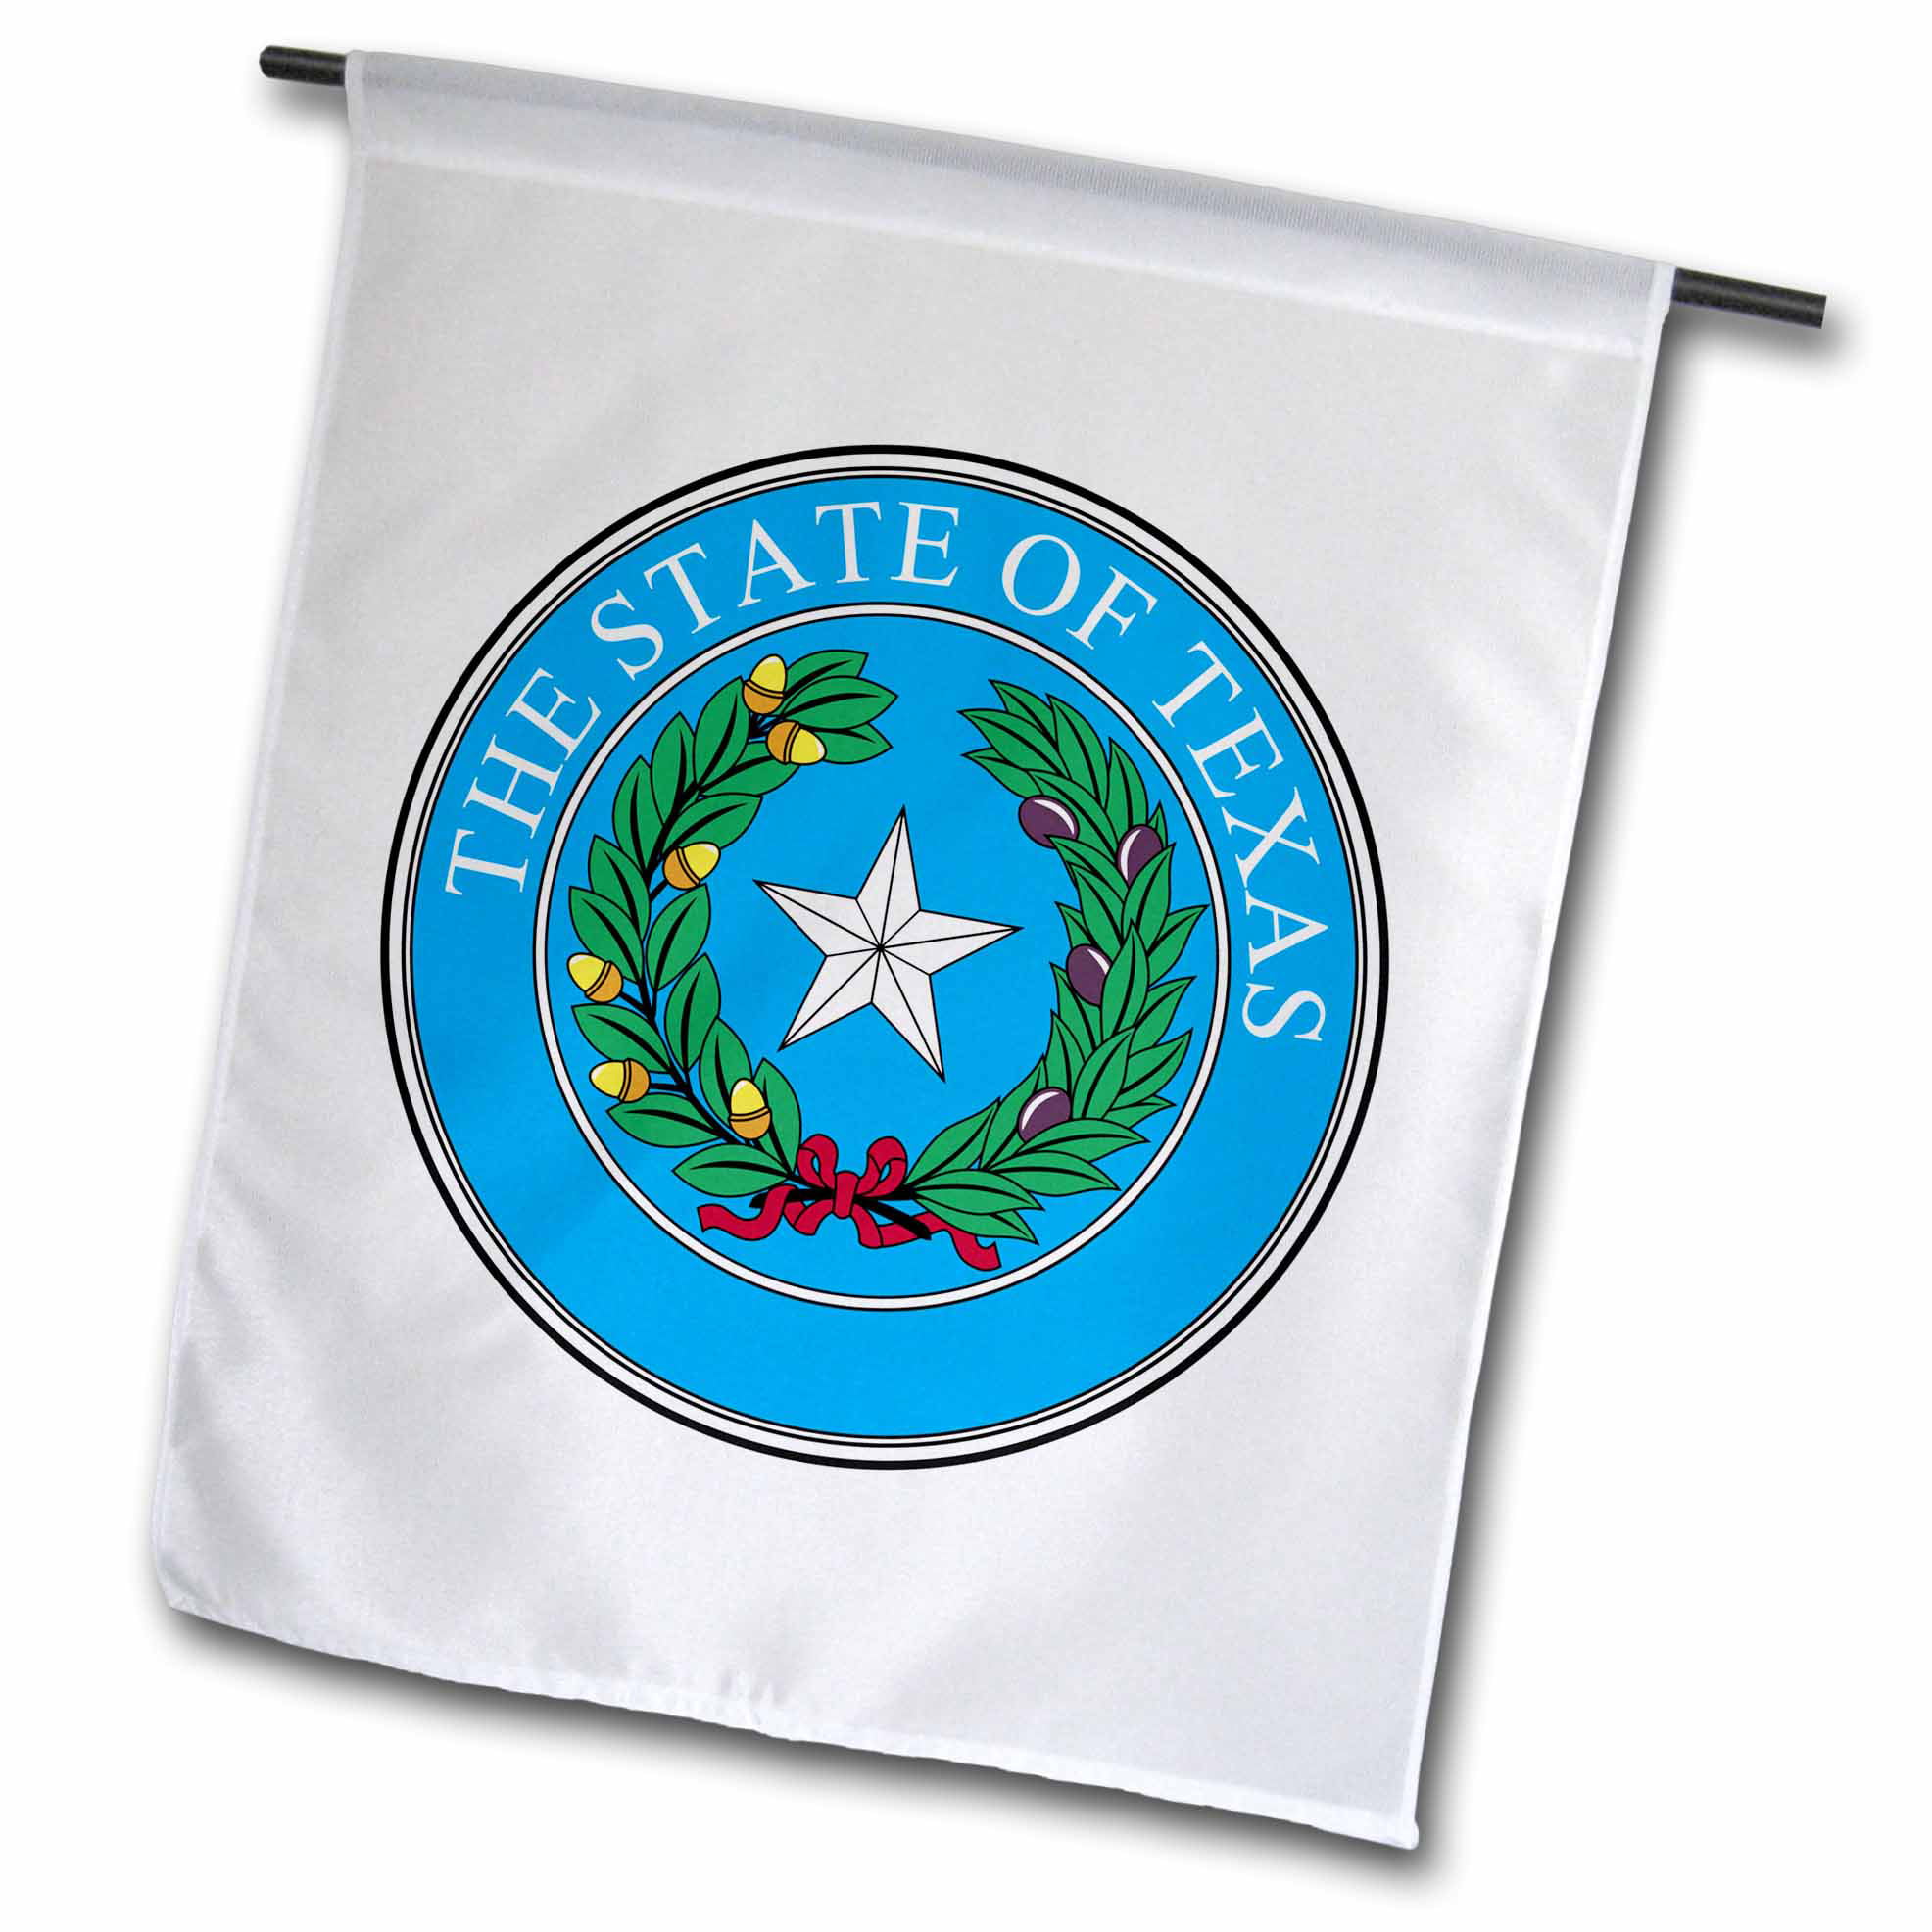 12 by 18-Inch PD-US State Flag of South Carolina 3dRose fl_55323_1 Garden Flag